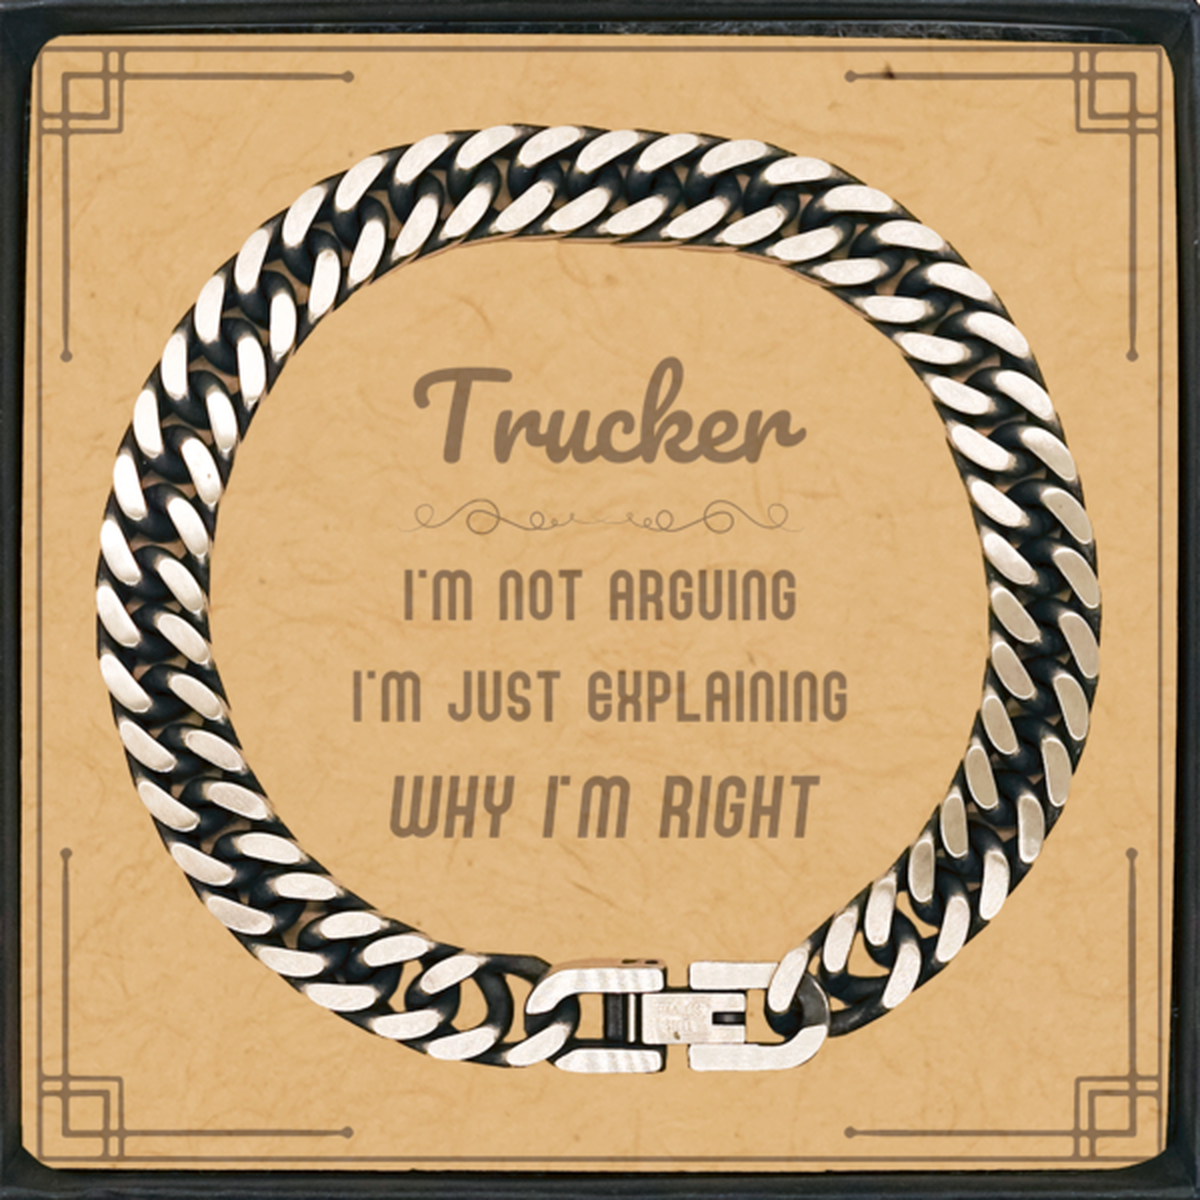 Trucker I'm not Arguing. I'm Just Explaining Why I'm RIGHT Cuban Link Chain Bracelet, Funny Saying Quote Trucker Gifts For Trucker Message Card Graduation Birthday Christmas Gifts for Men Women Coworker